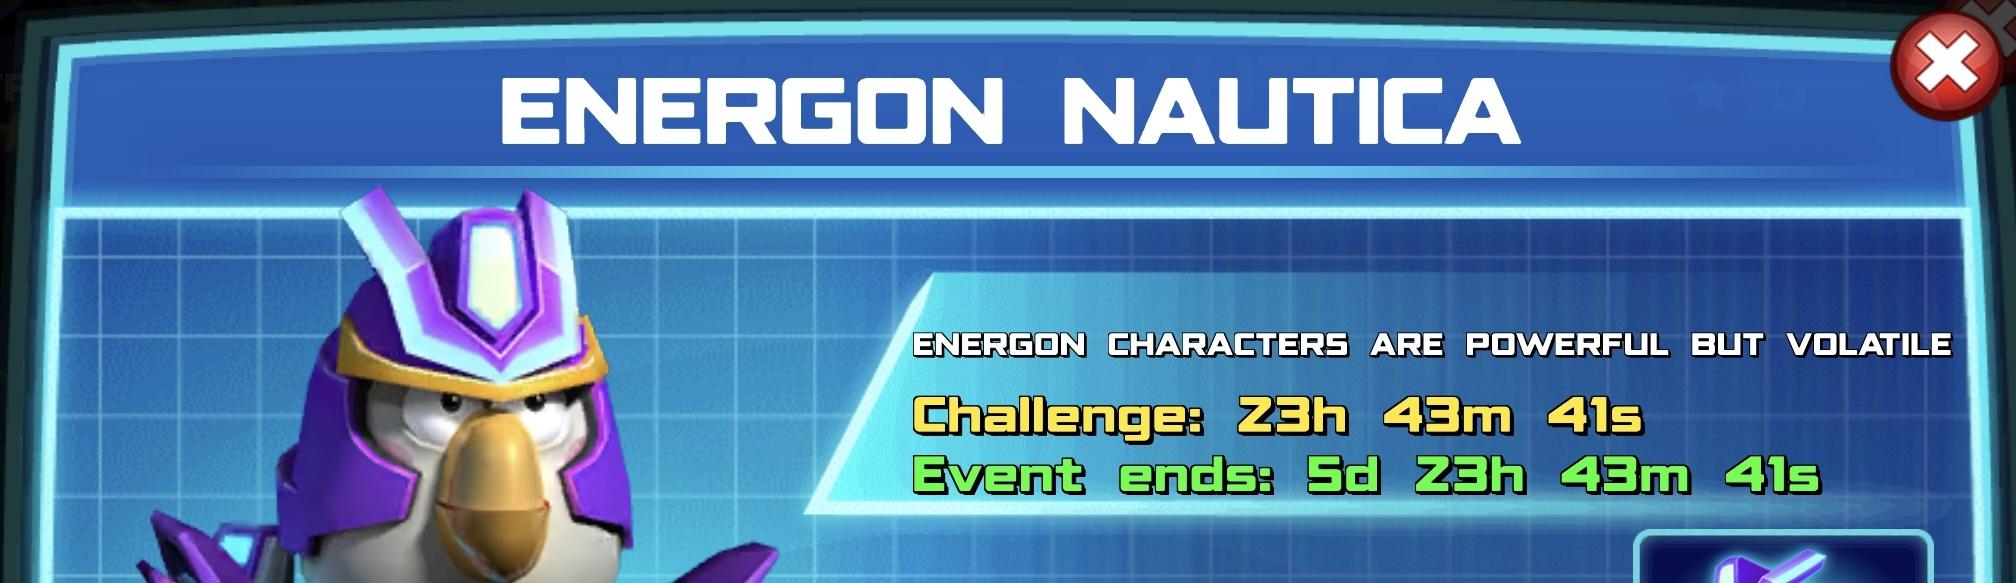 The event banner for Energon Nautica